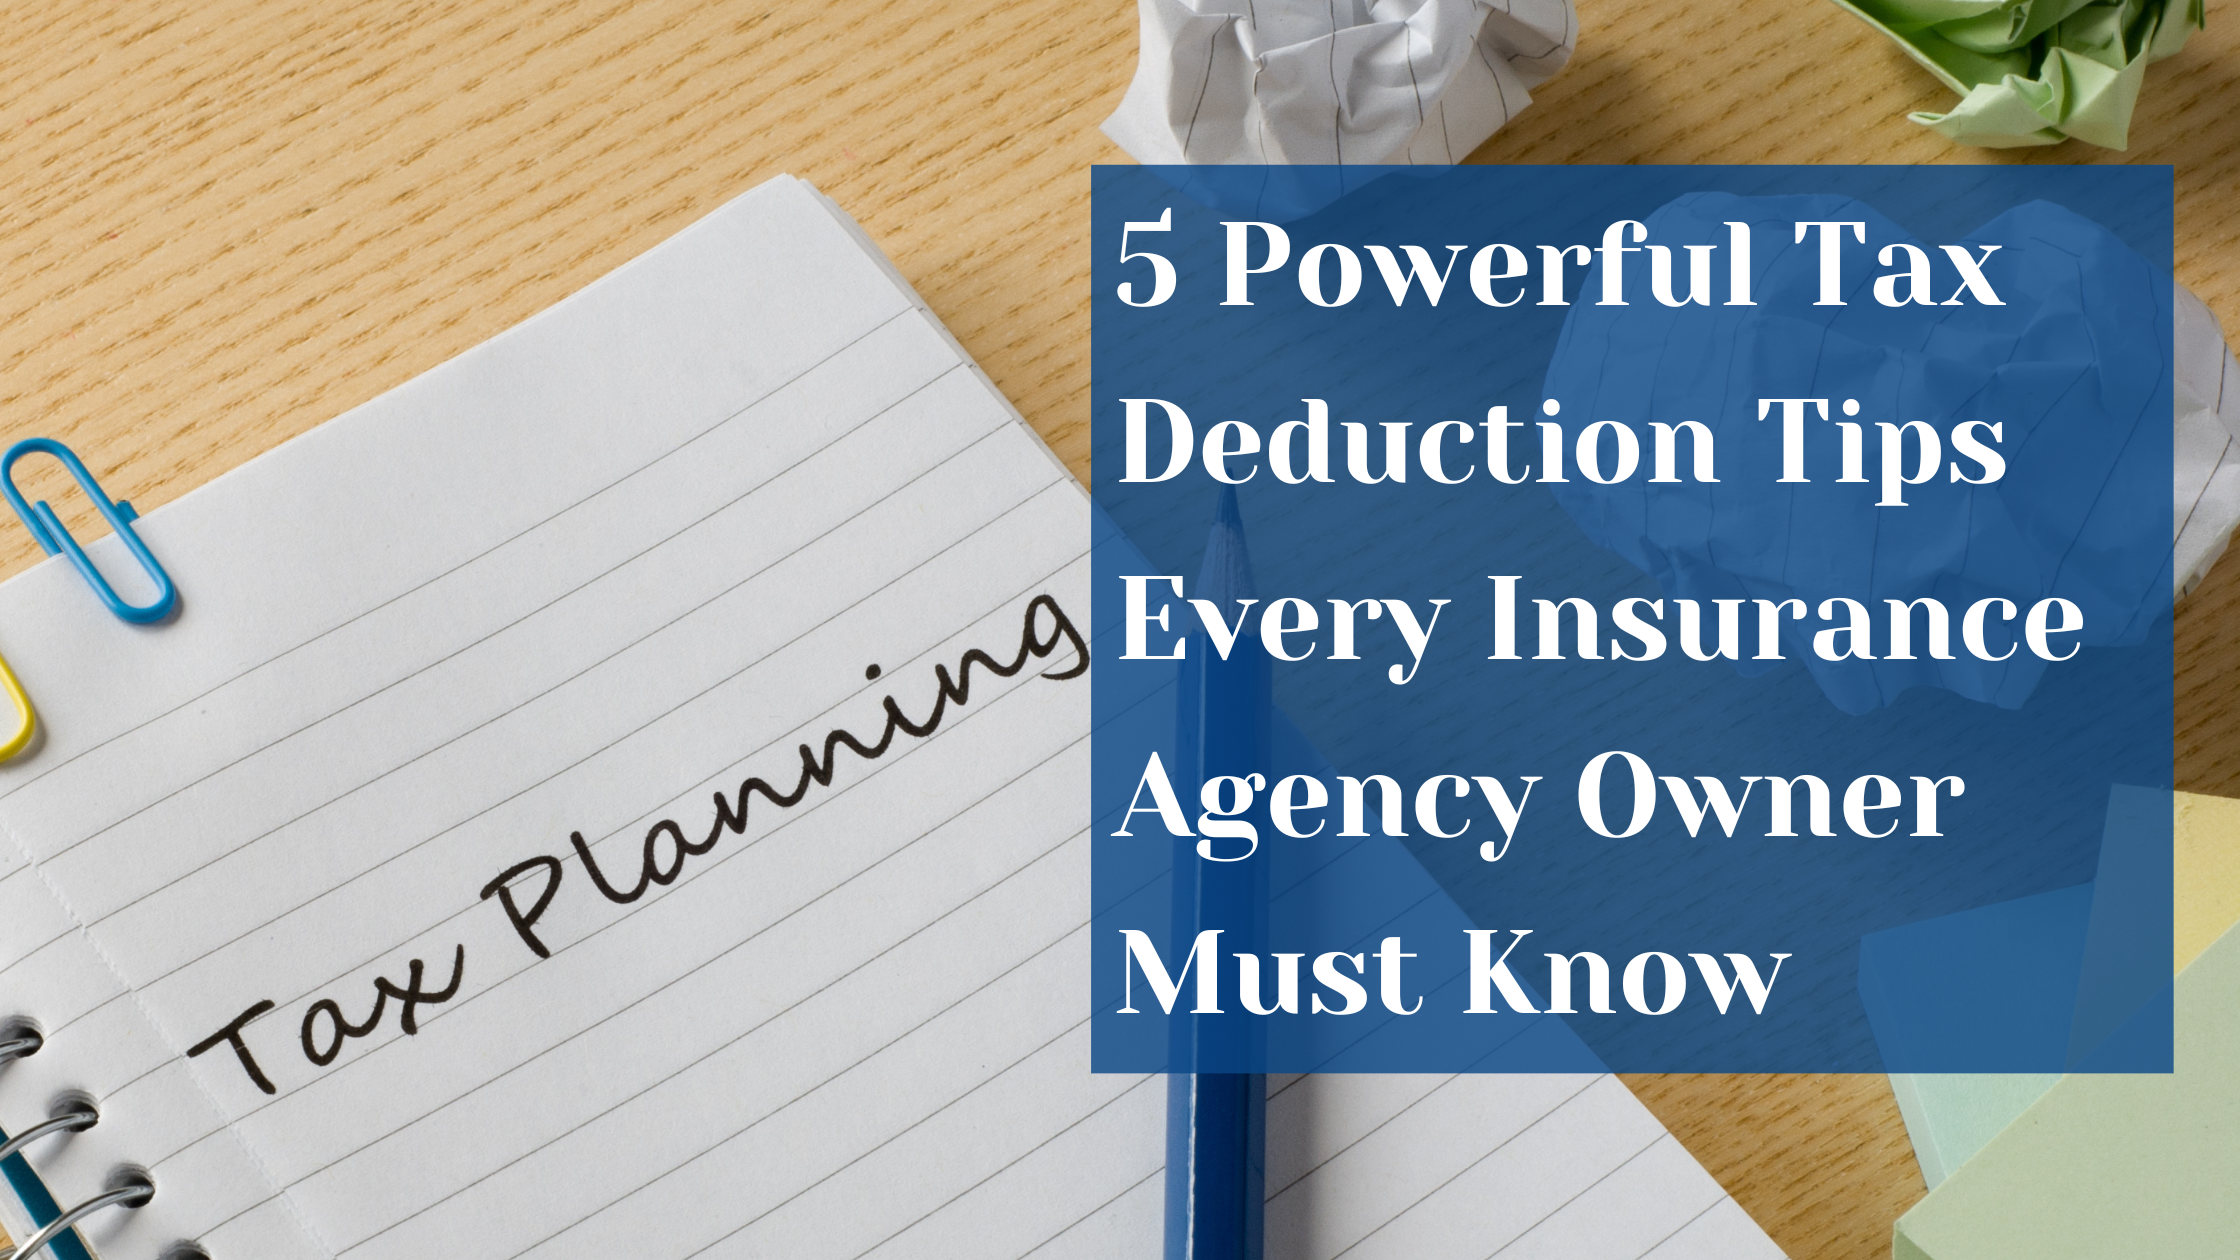 5 Powerful Tax Deduction Tips Every Insurance Agency Owner Must Know